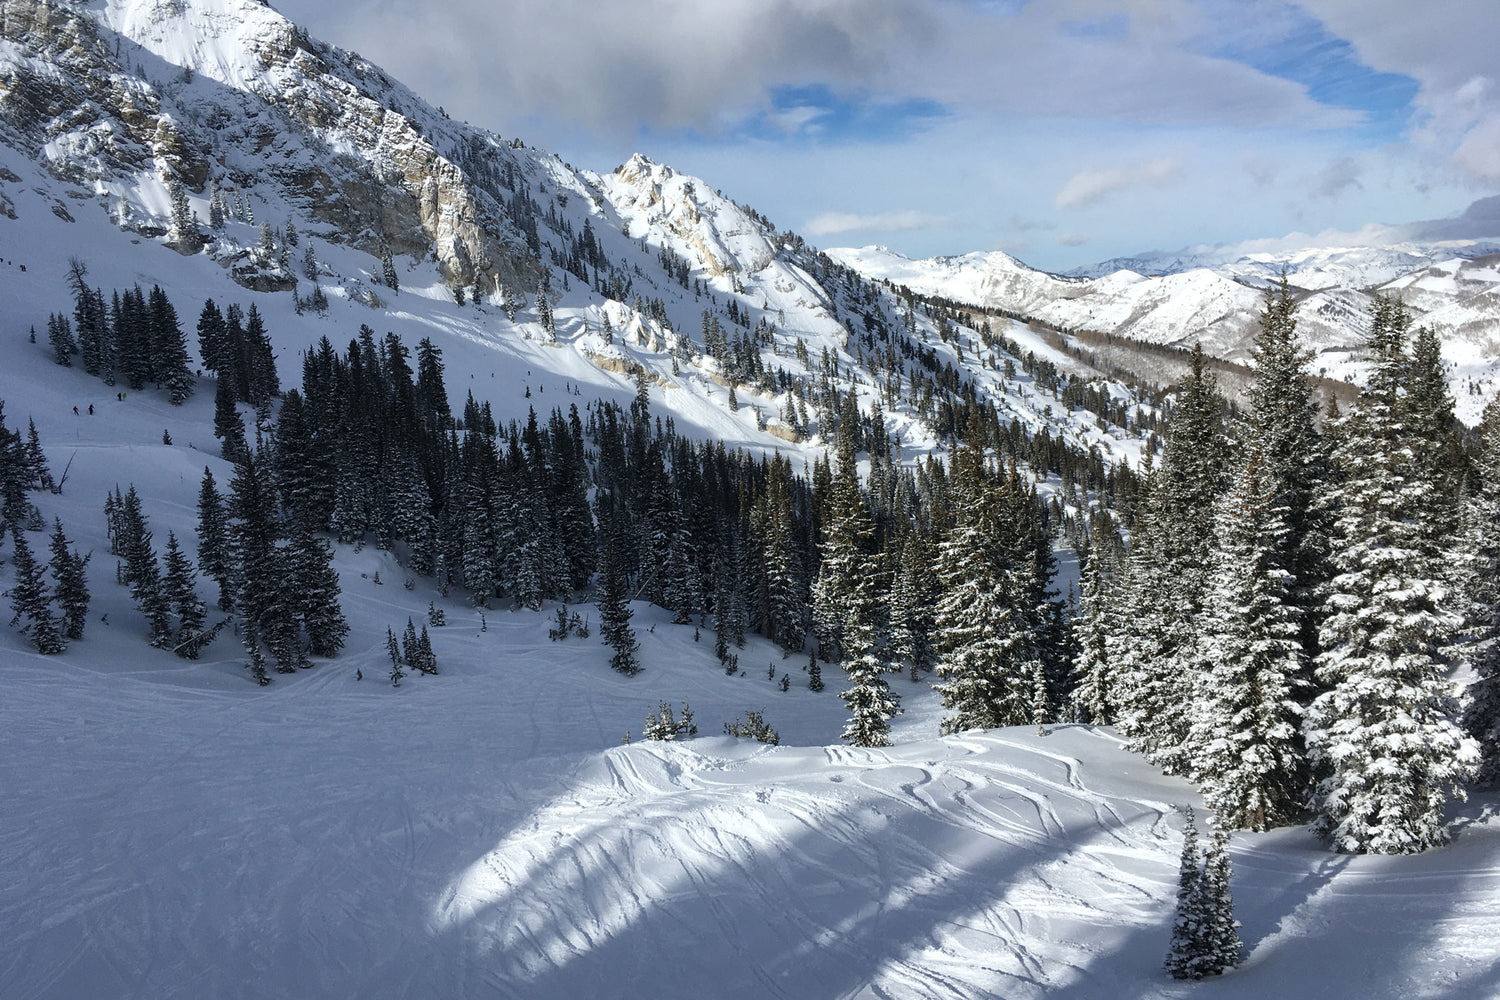 48 Hours in Salt Lake City: How to Maximize Your Weekend Ski Trip